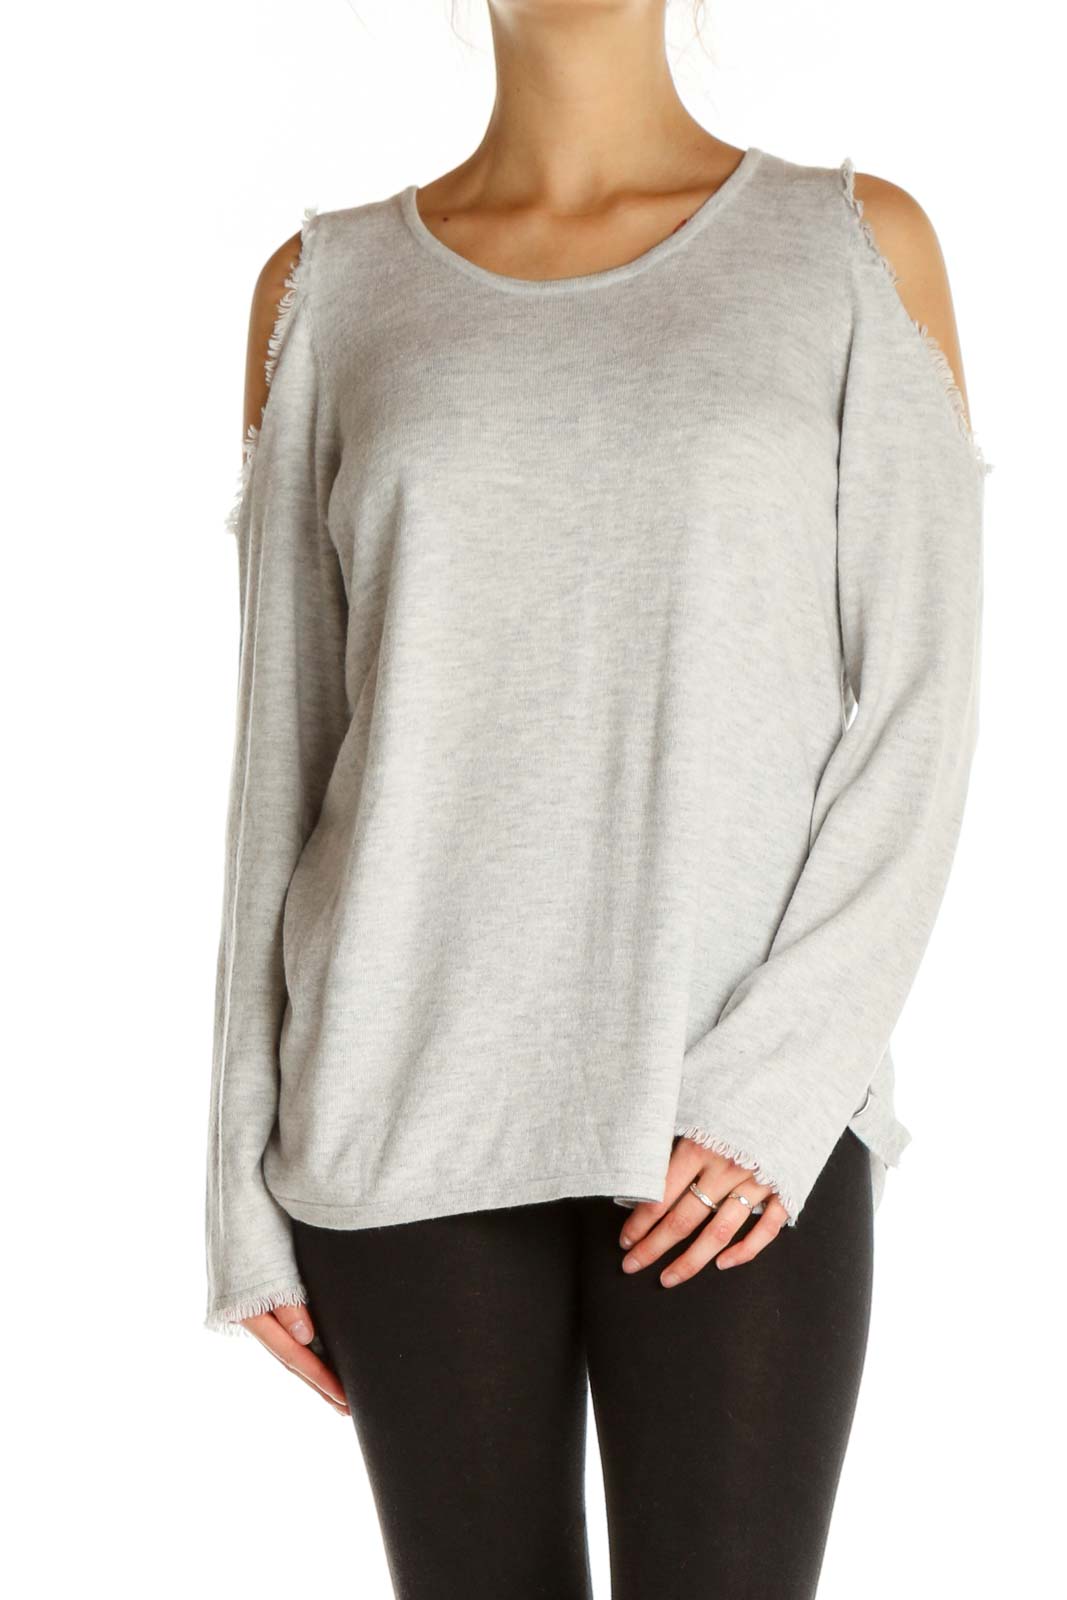 Gray Solid All Day Wear Sweater Front